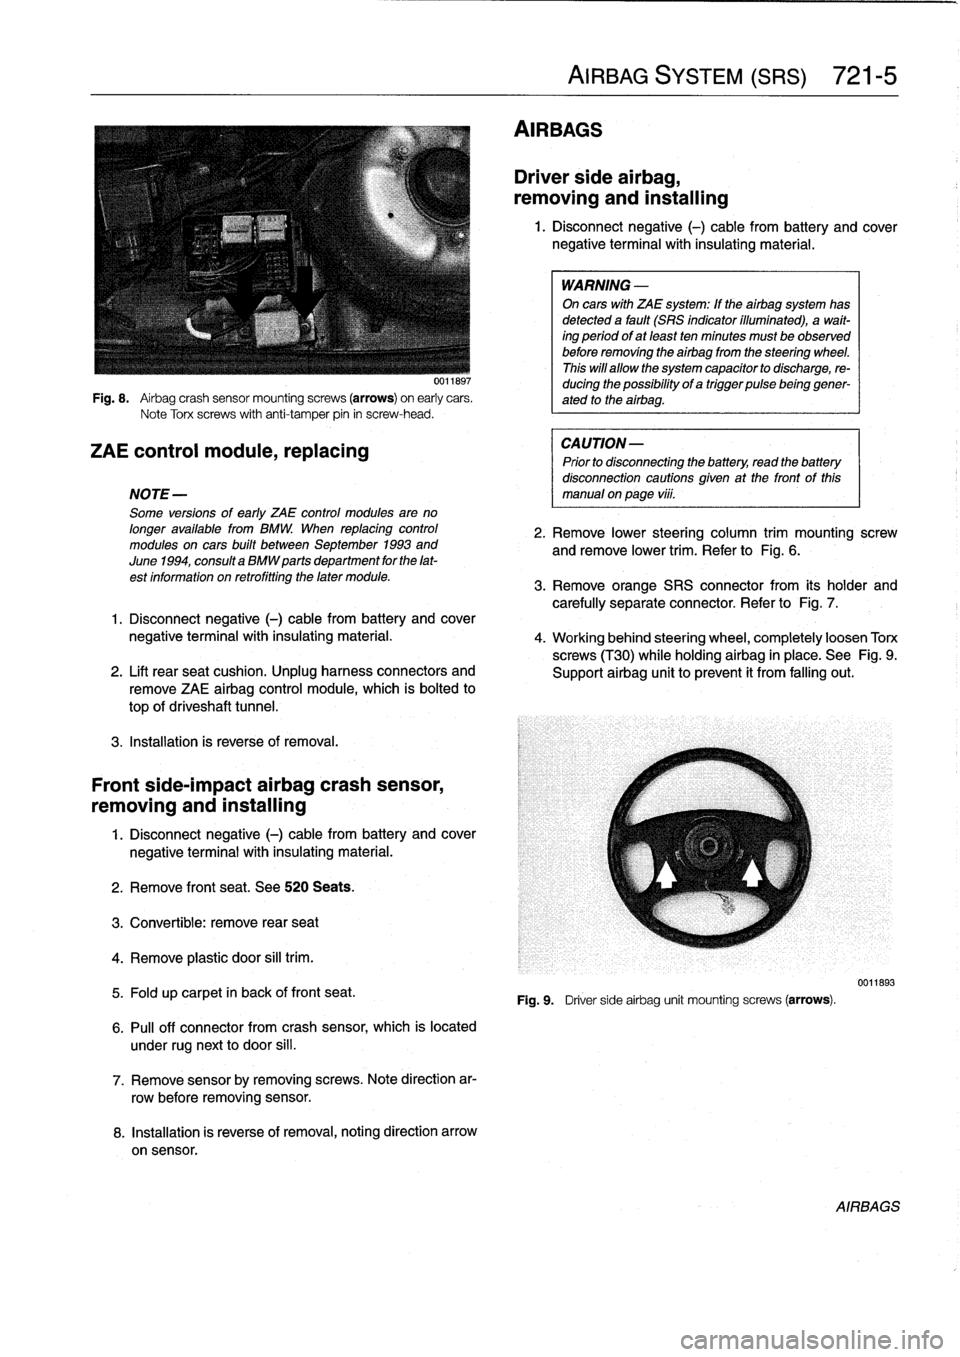 BMW 325i 1996 E36 Workshop Manual 
Fig
.
8
.

	

Airbag
crash
sensor
mountingscrews
(arrows)
on
early
cars
.
Note
Torx
screws
with
anti-tamper
pin
in
screw-head
.

ZAE
control
module,
replacing

NOTE-

Some
versions
of
early
ZAE
contr